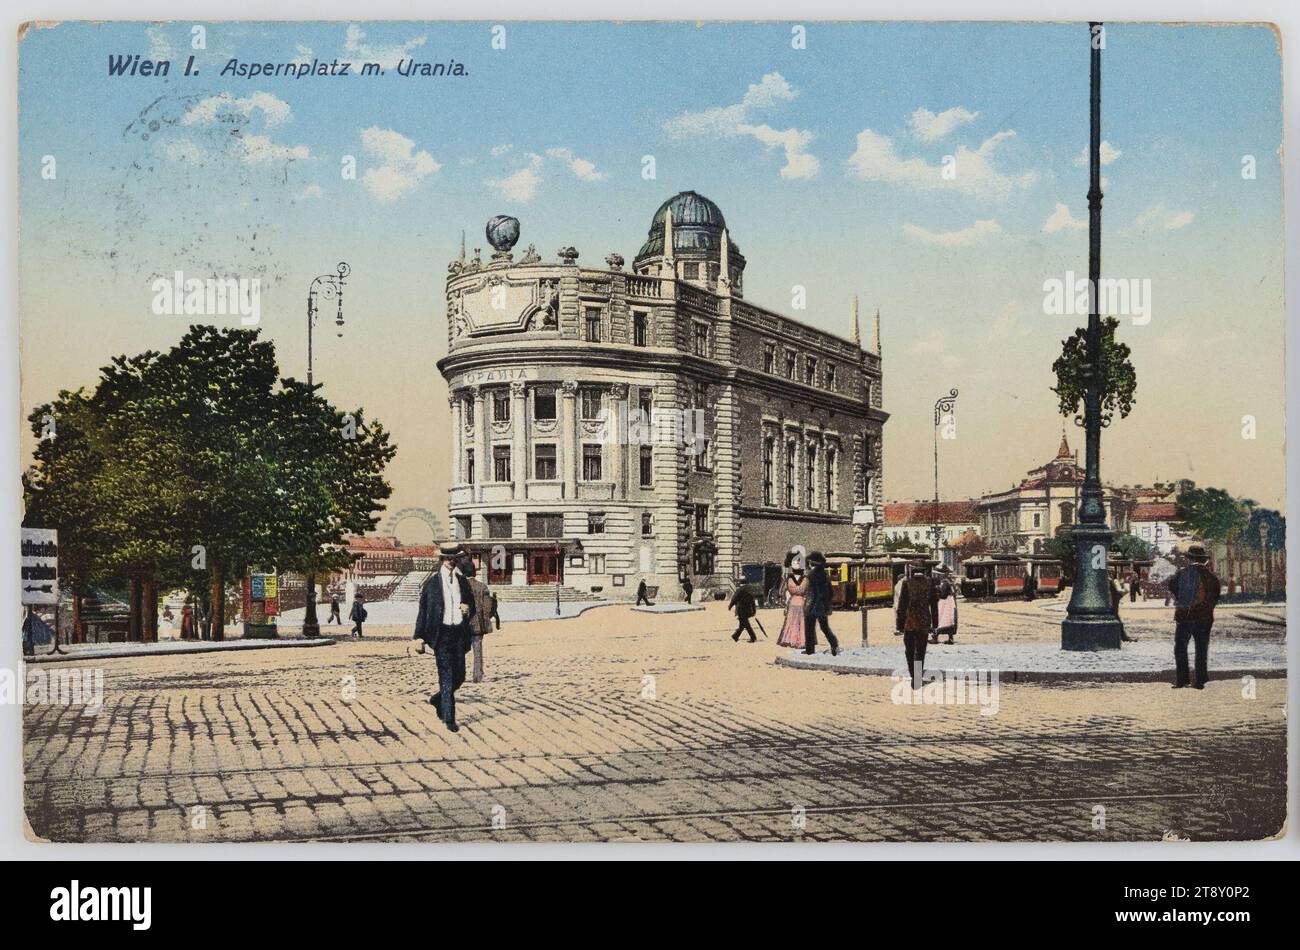 Vienna I. Aspernplatz m. Urania, Verlag Anton Böhm, Wien (A. B. & Co., Vienna), Producer, 1912, coated paperboard, photochrome, height×width: ca. 9×14 cm, Inscription, FROM, Wien 1, Aspernplatz, TO, Krumbach bei Edlitz, N.Ö., ADDRESS, Hochwohlg., Frau., Krumbach bei Edlitz, MESSAGE, 14.9.1912, Liebste Mitzi!, Heartfelt greetings and congratulations for tomorrow (signature), Also, all the best wishes from Emma, Education and Training, Science and Technology, Ringstraße, Media and Communication, Postcards with transliteration, 1st District: Innere Stadt, with people, Urania, handwriting Stock Photo